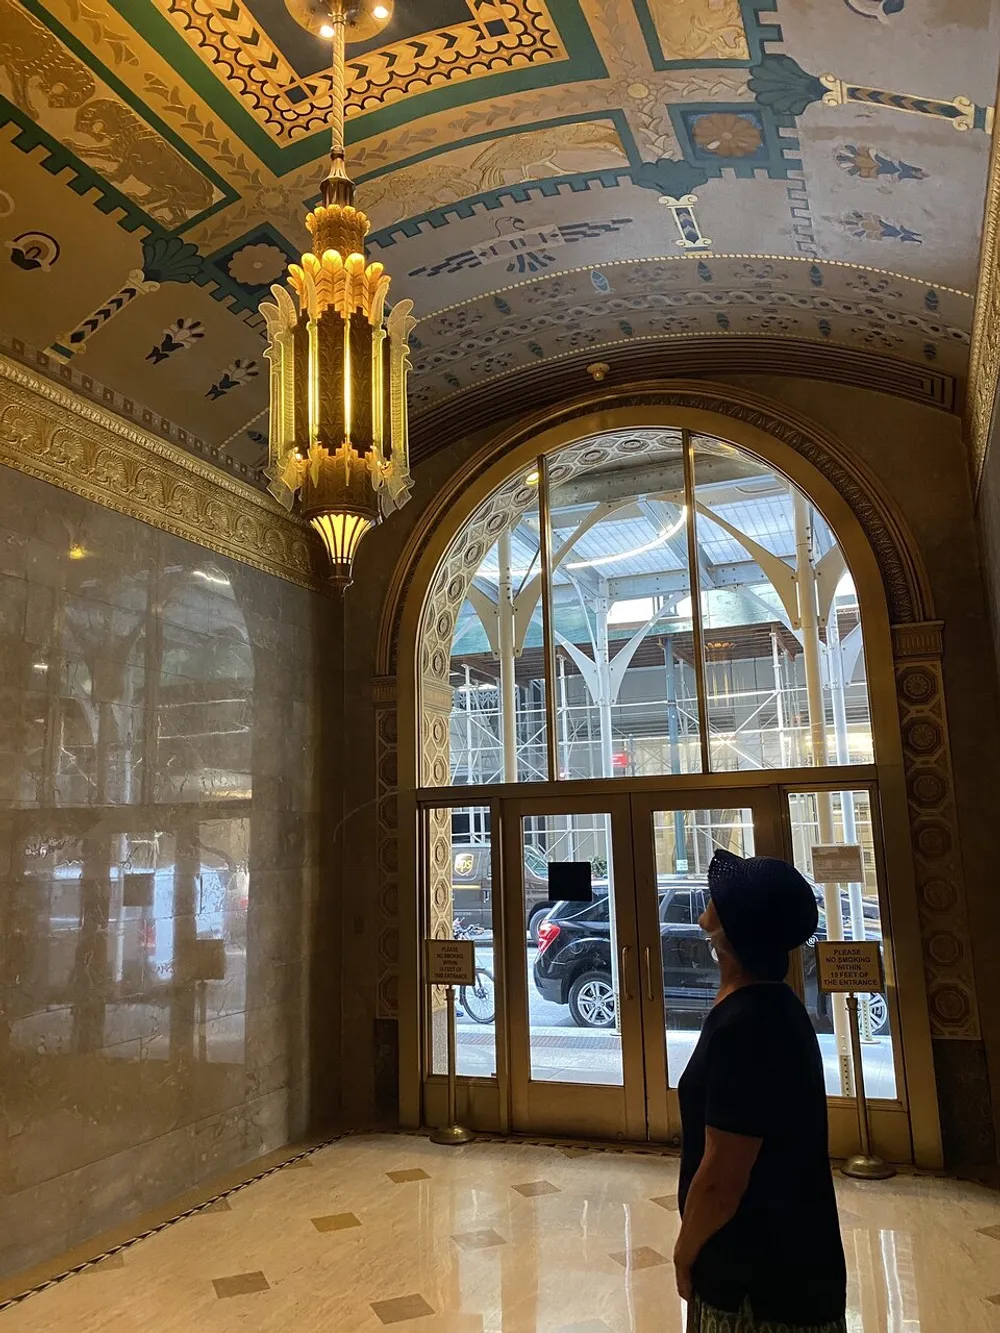 A person is standing inside a grand building with ornate ceilings and a chandelier looking out through arched glass doors